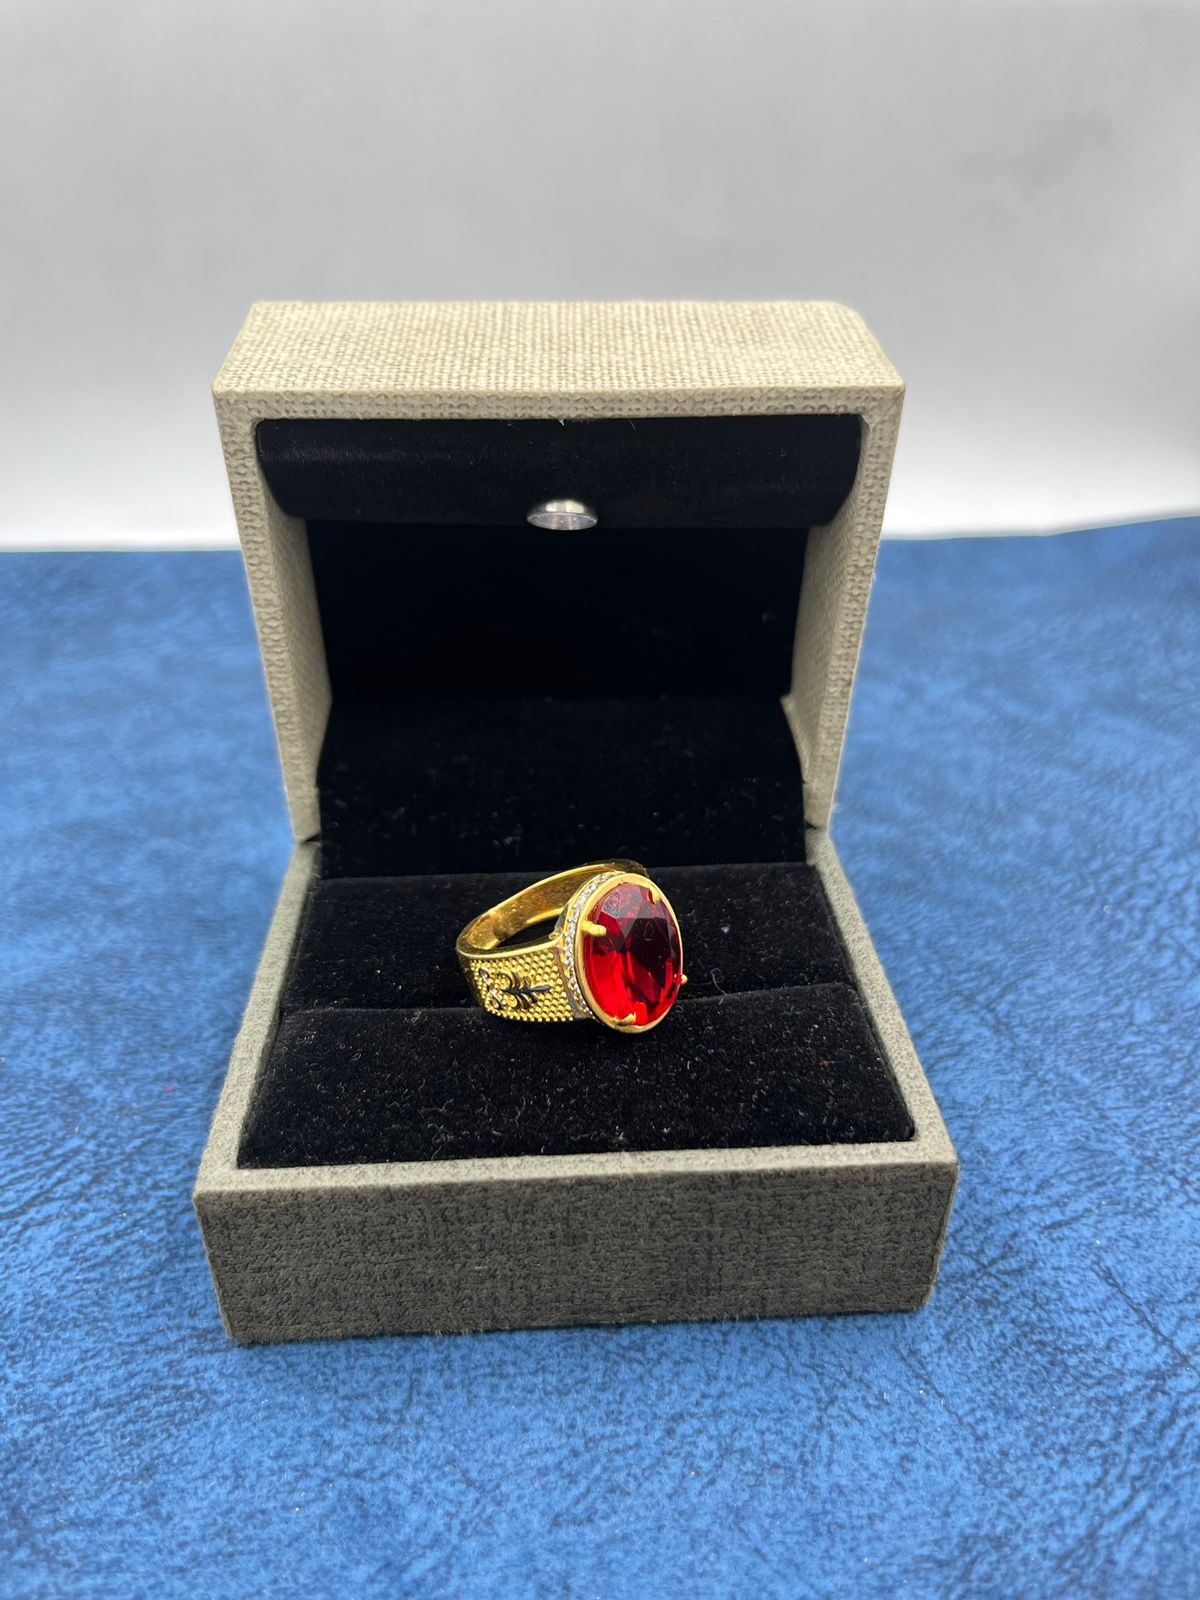 Amazon.com: Ruby Stone Ring, Man Handmade Silver Ring, Ruby Red Stone Ring,  Engraved Silver Ring, Ottoman Style Ring, 925k Sterling Silver Ring :  Handmade Products